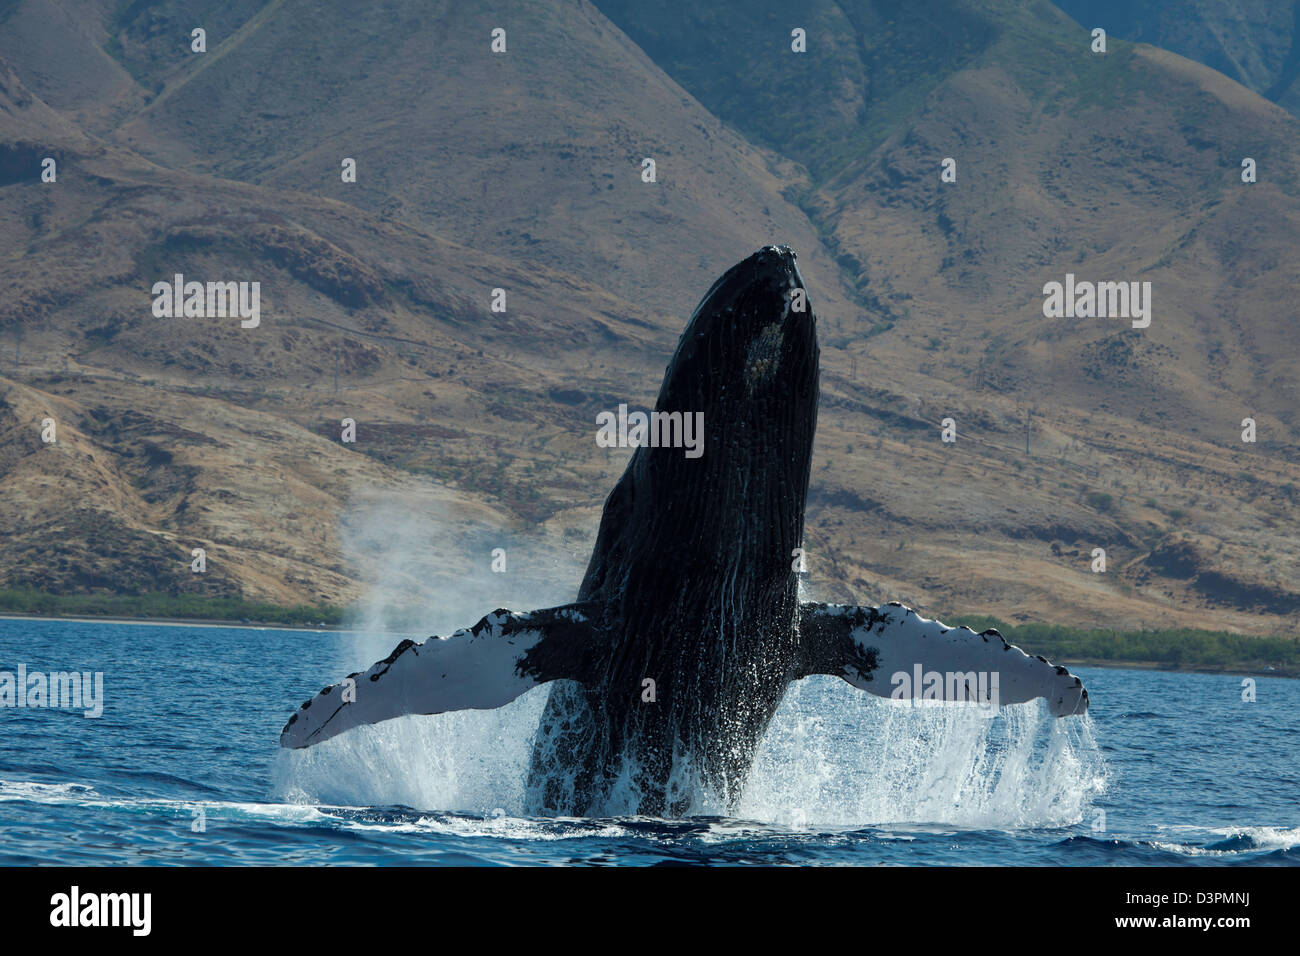 Breaching humpback whale, Megaptera novaeangliae, with West Maui in the background, Hawaii. Stock Photo